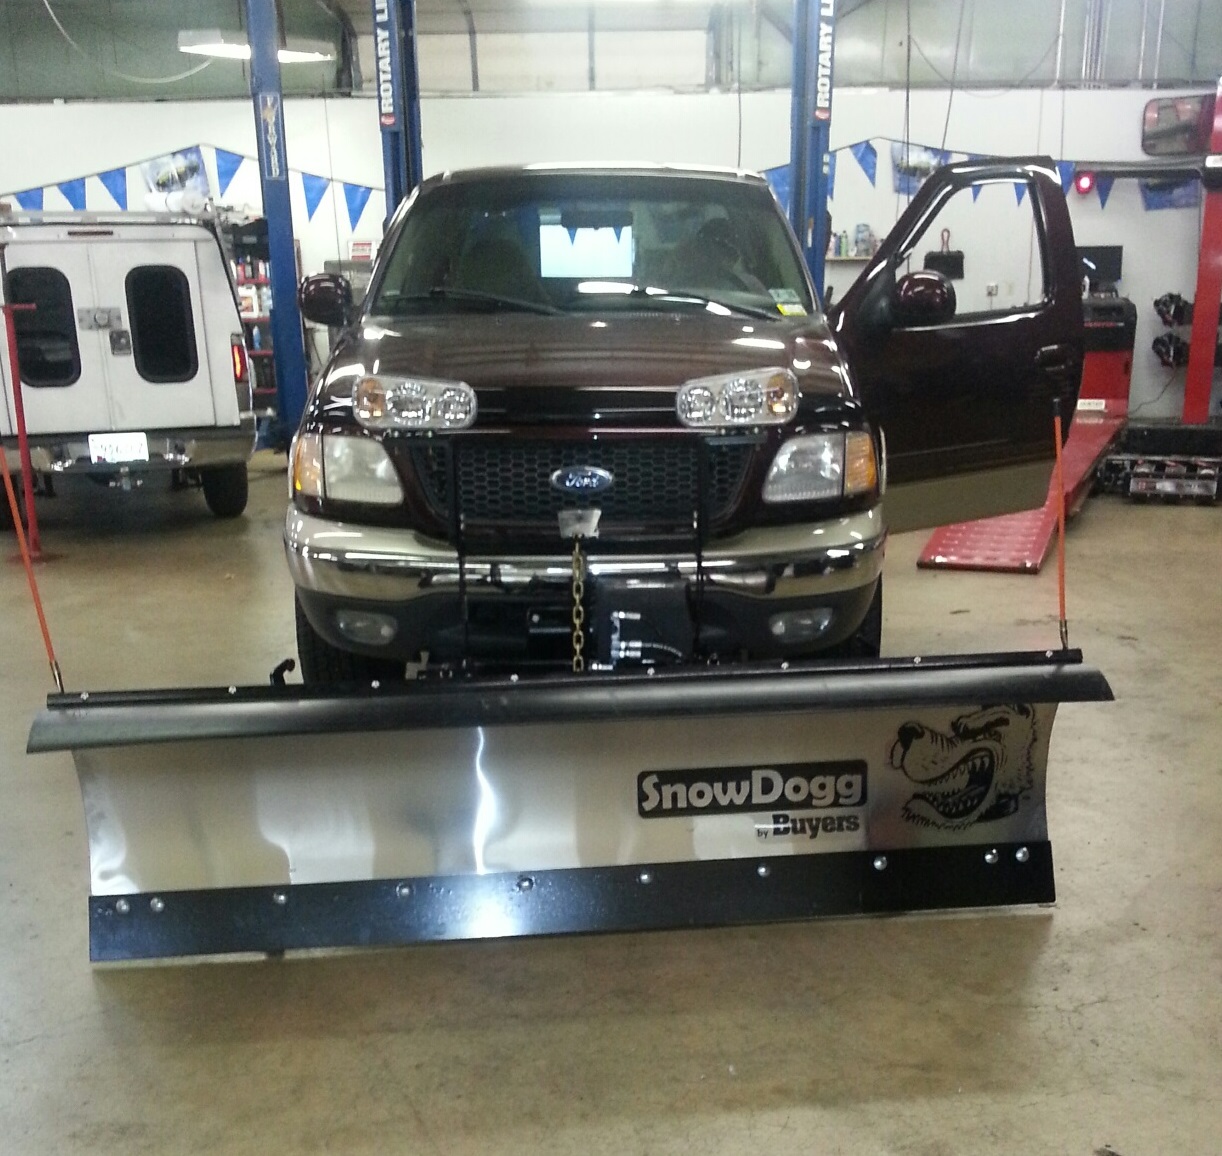 SnowDogg Plow Hagerstown MD Byrd Tire Alignment